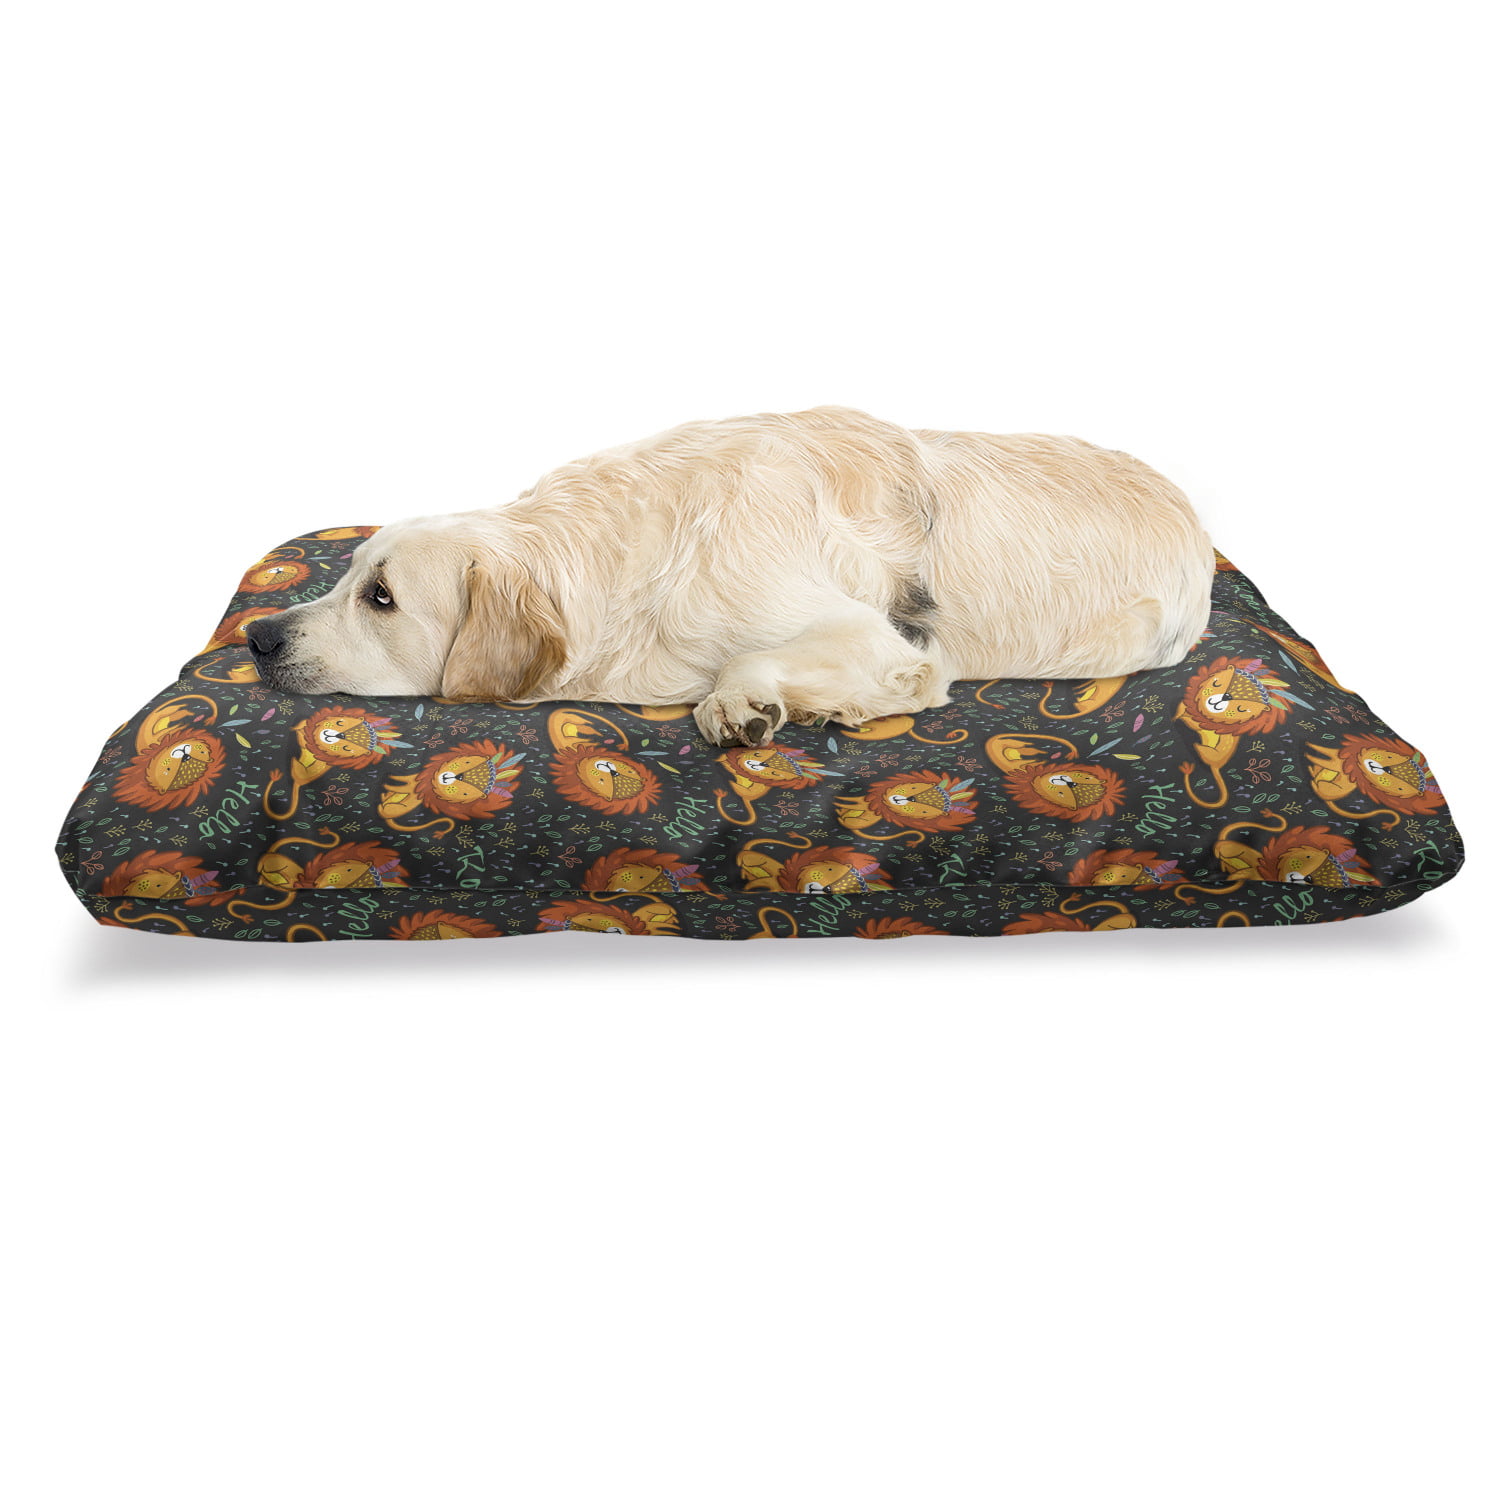 Cartoon Pet Bed Lions Ilrations In, King Bed With Doggie Insert